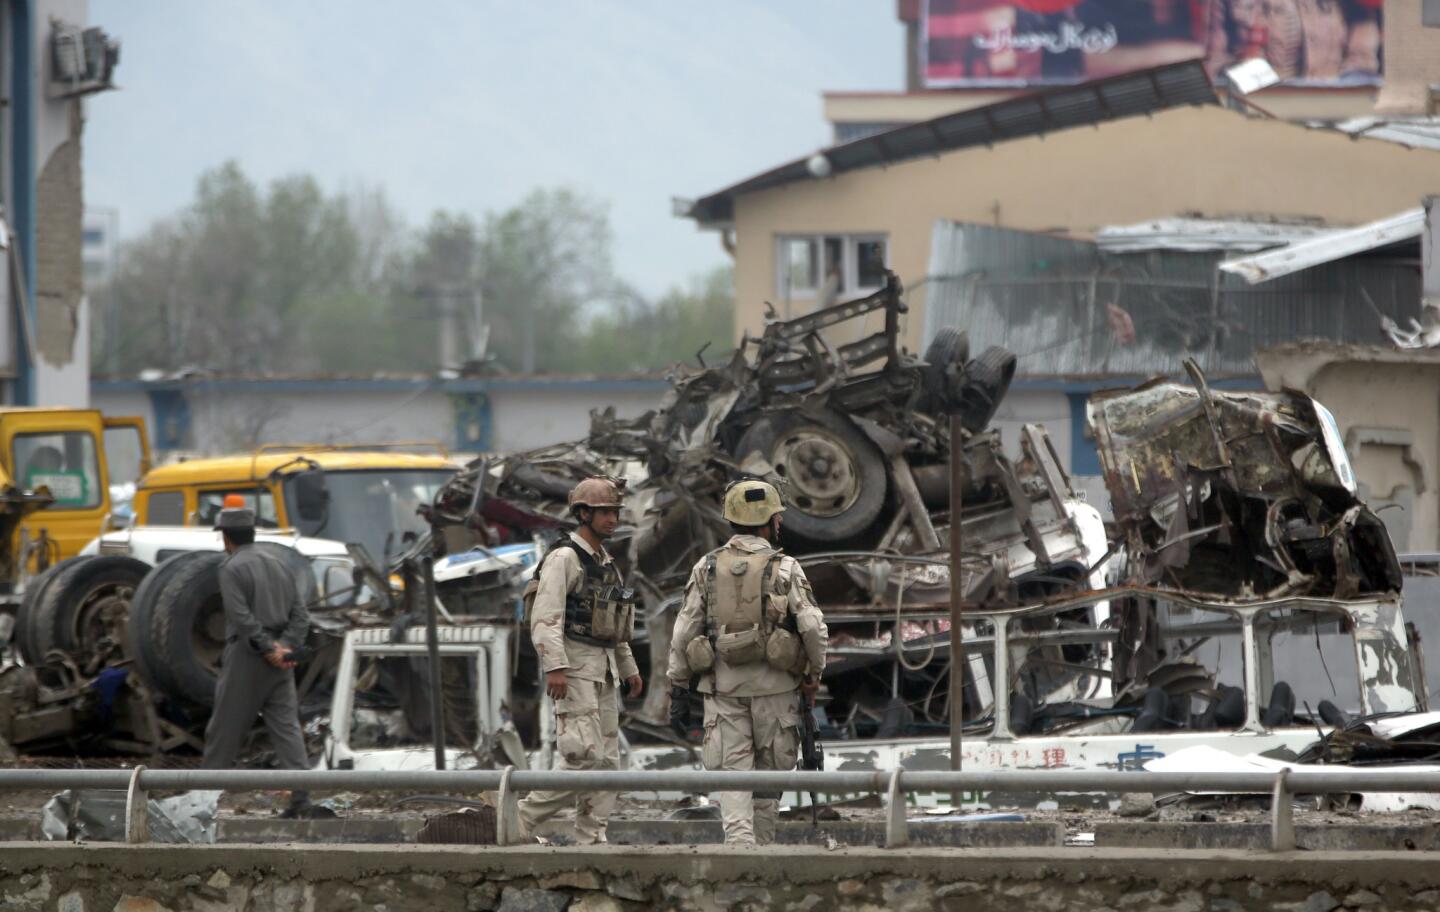 Suicide bombing in Kabul